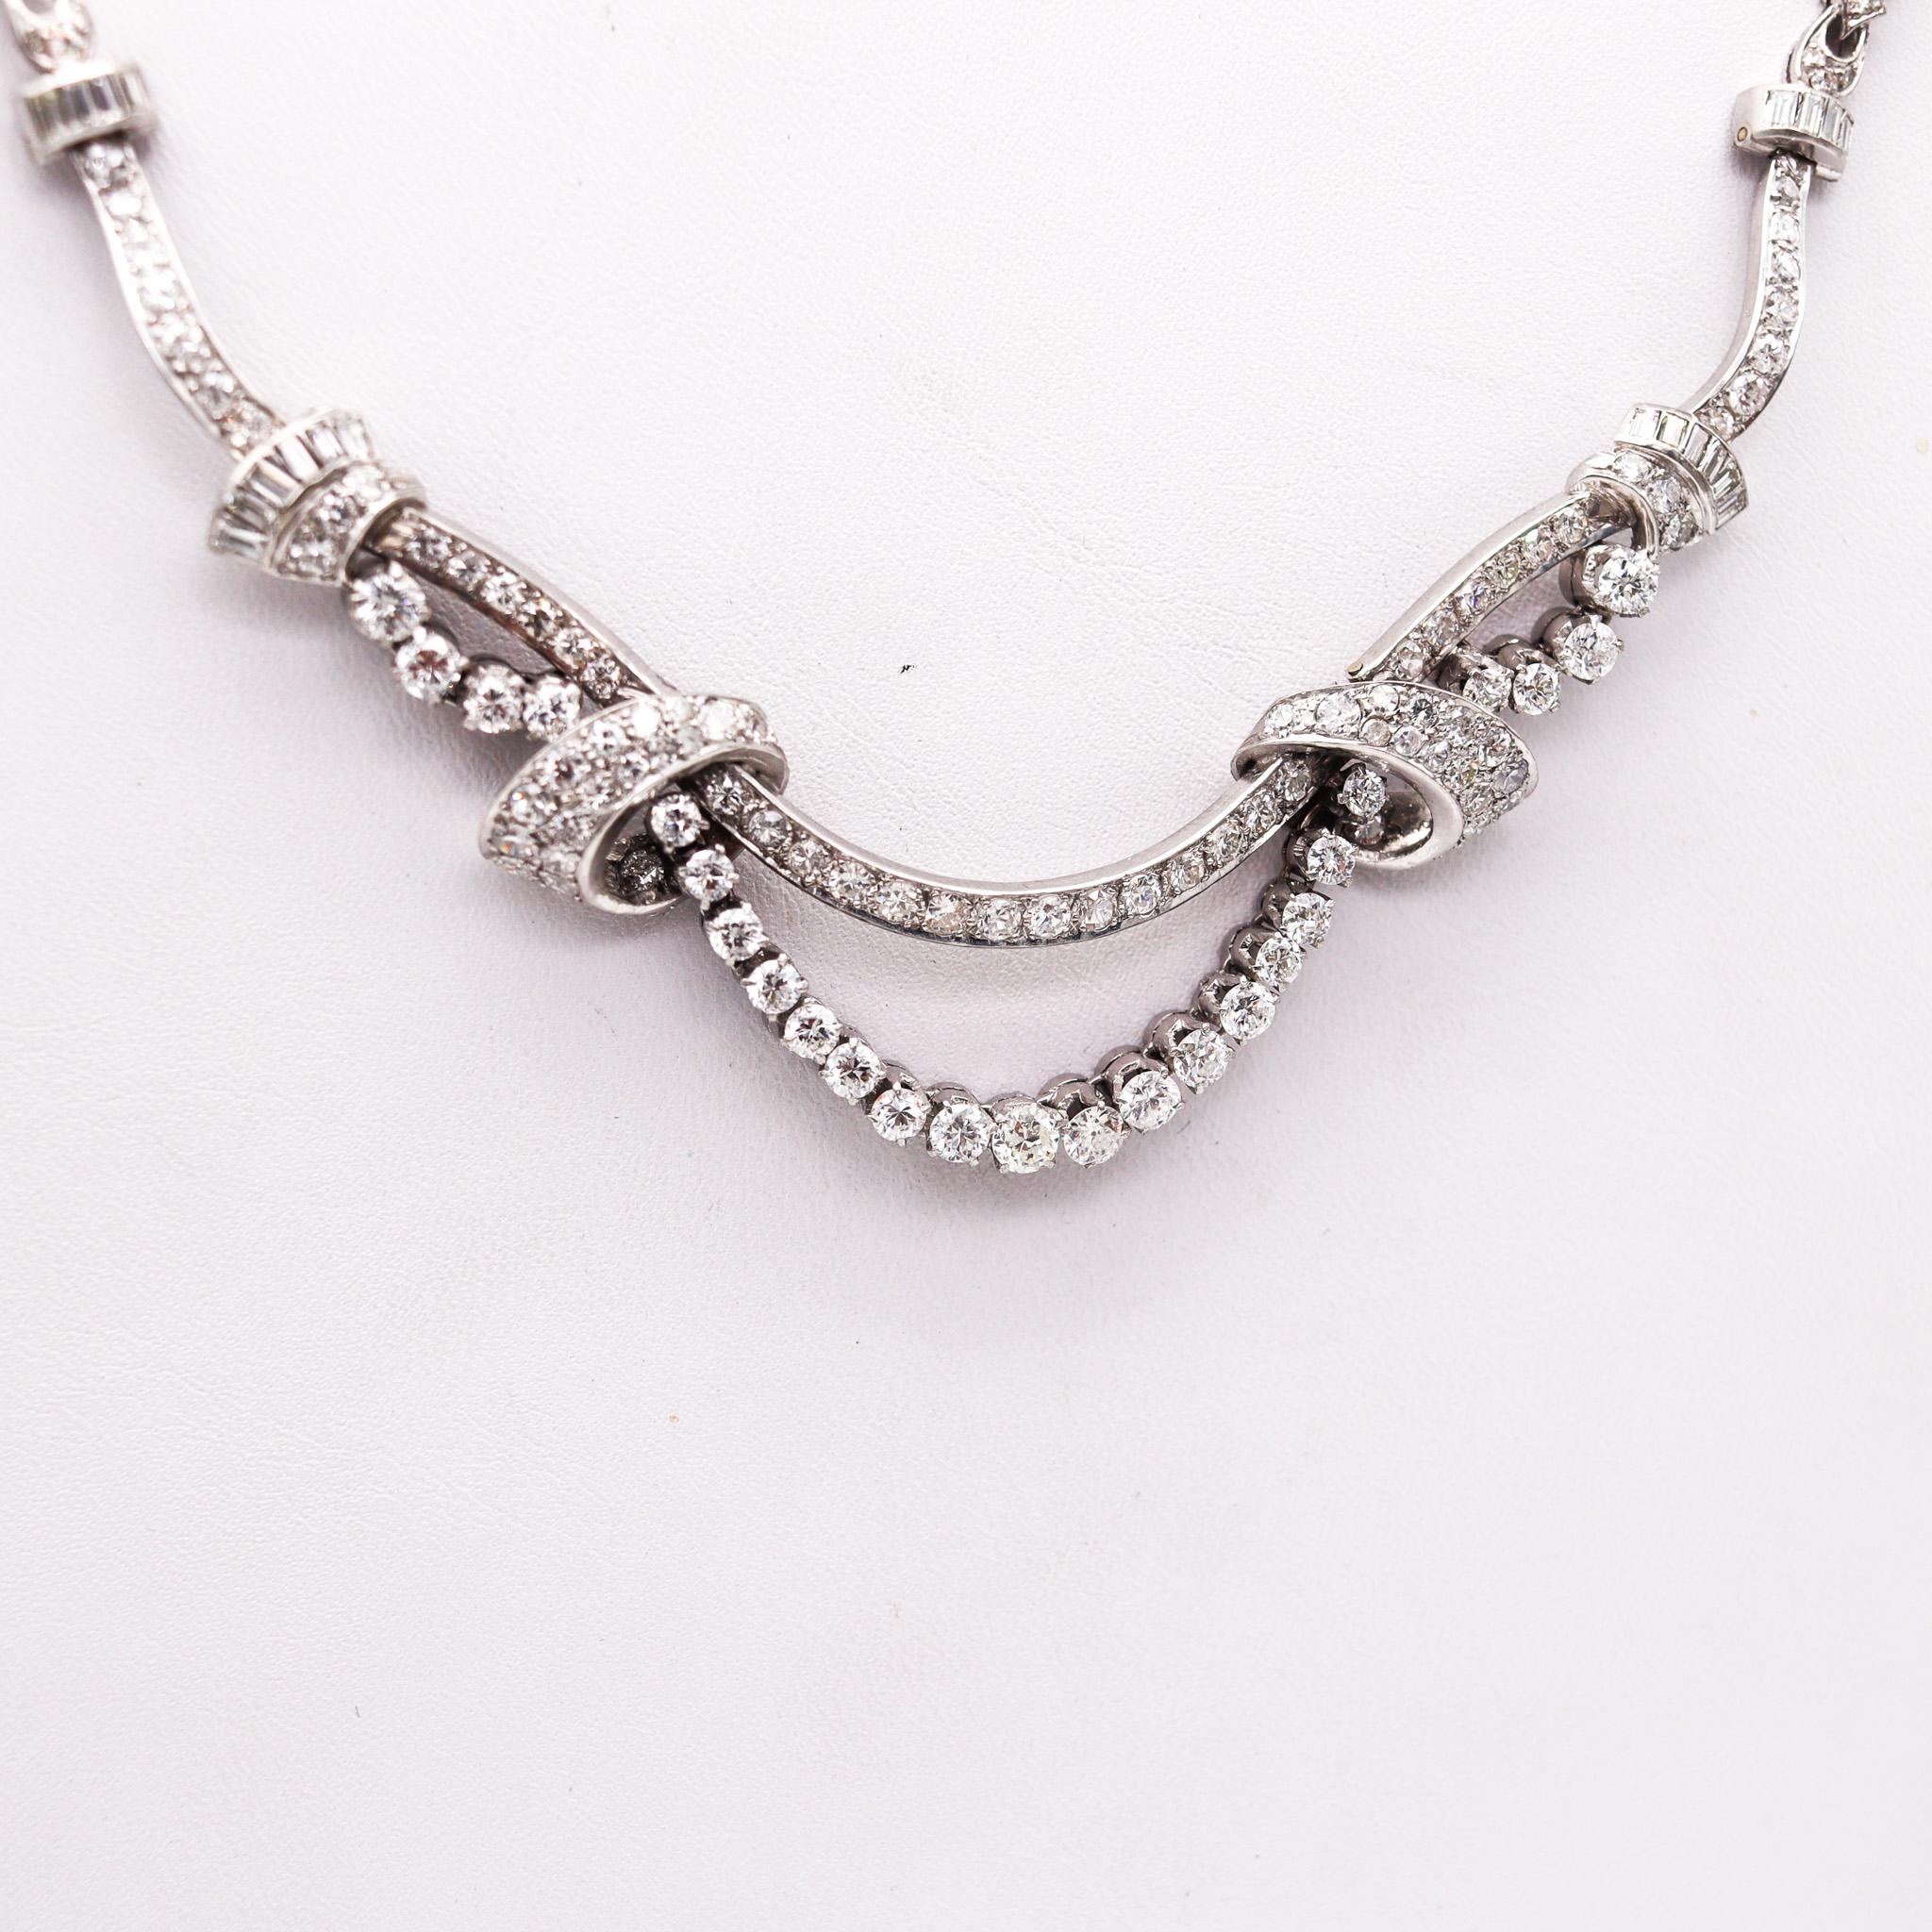 Art deco garlands necklace with diamonds.

Exceptional diamonds set necklace, created in America during the art deco period, back in the 1935. This beautiful movie star necklace was crafted with double garlands in solid platinum and embellished with